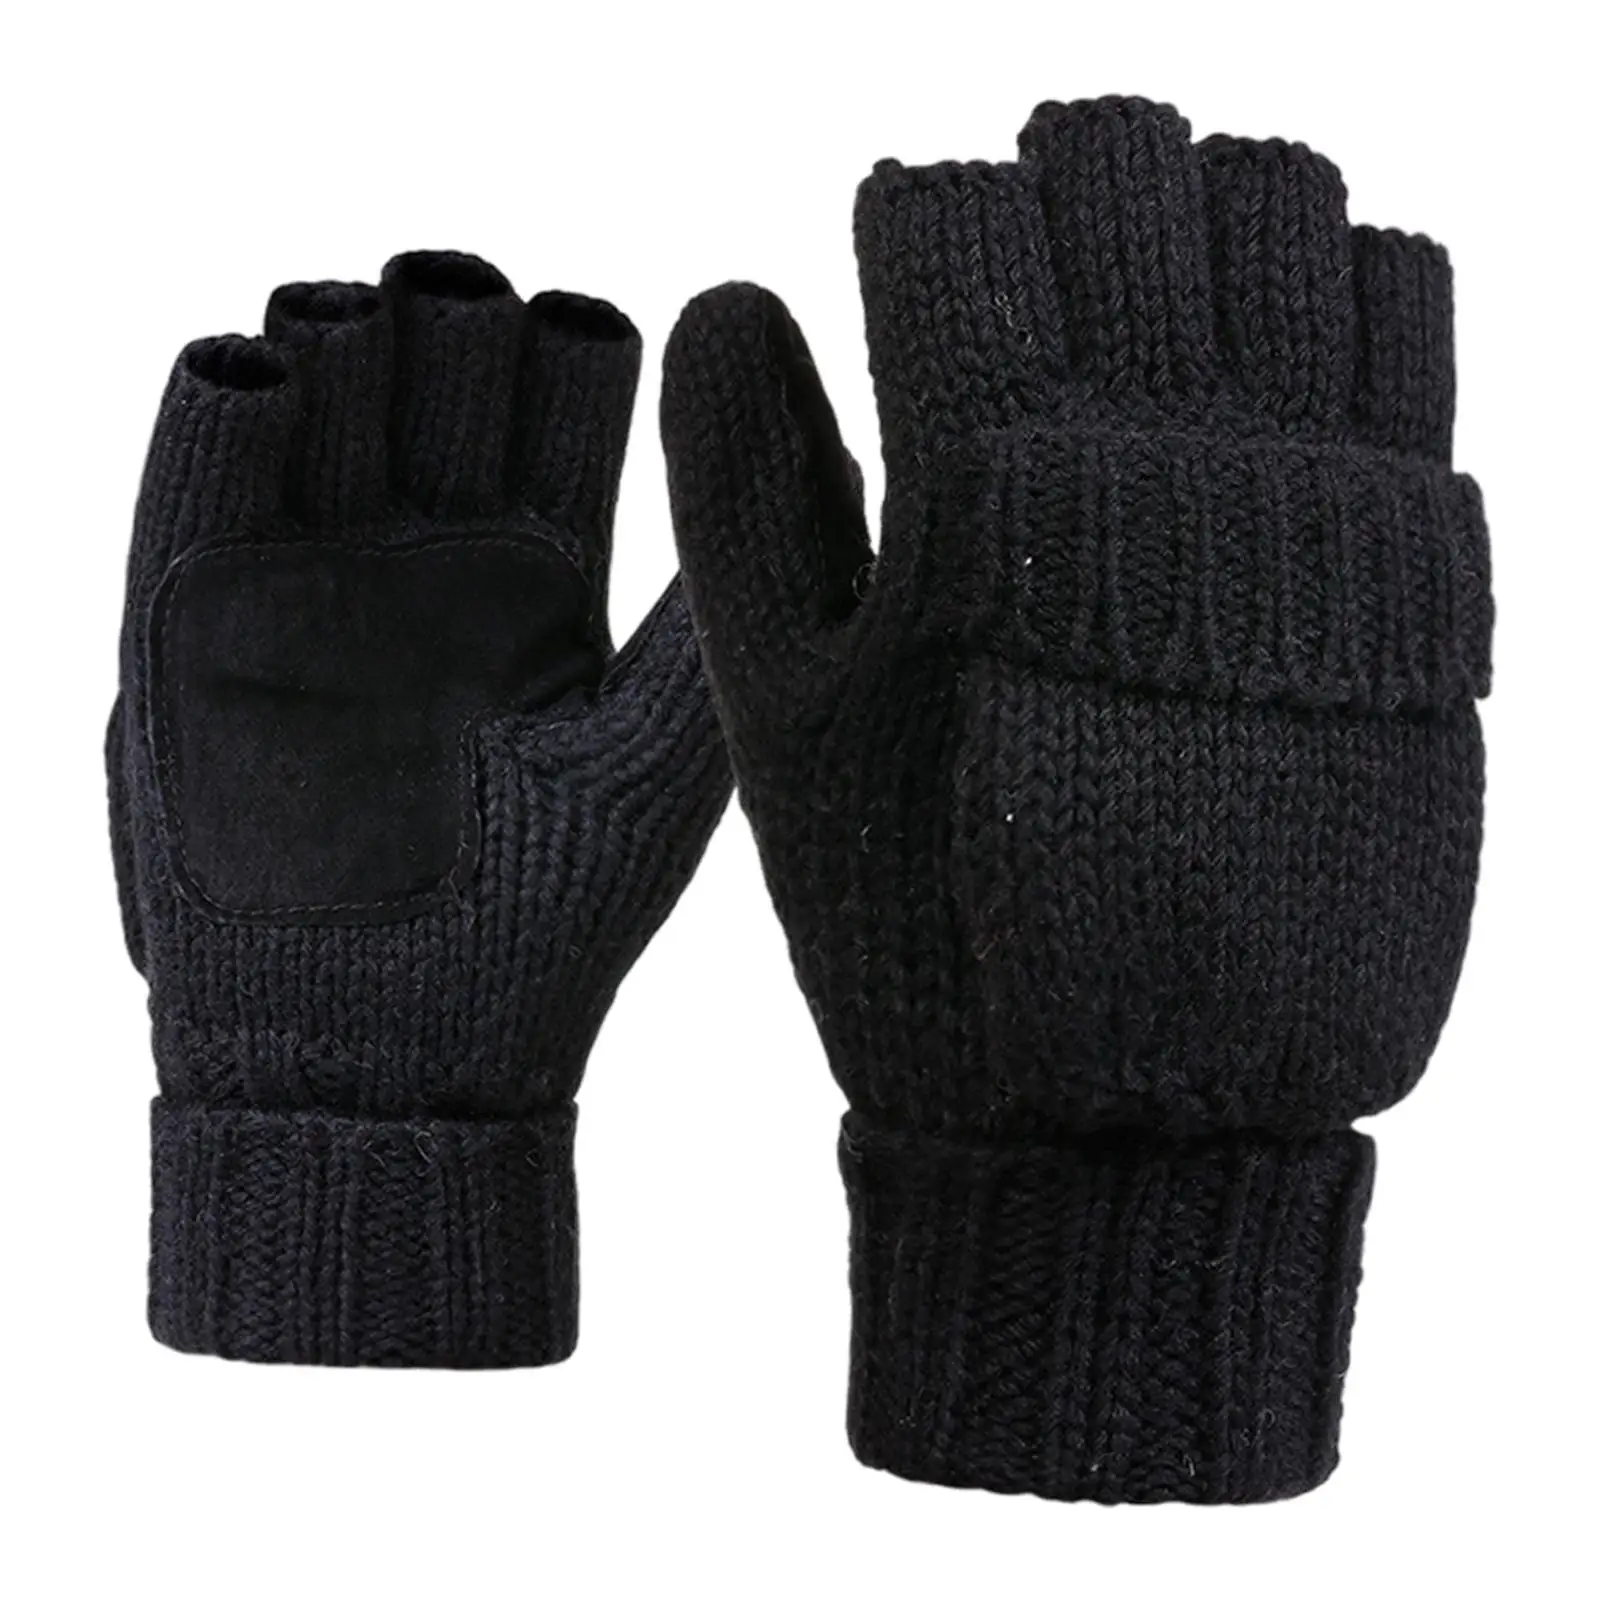  Fingerless Gloves Knitting  Cashmere Thick Warm Winter Half Finger  for Running/Indoor//Cold Weather, Women